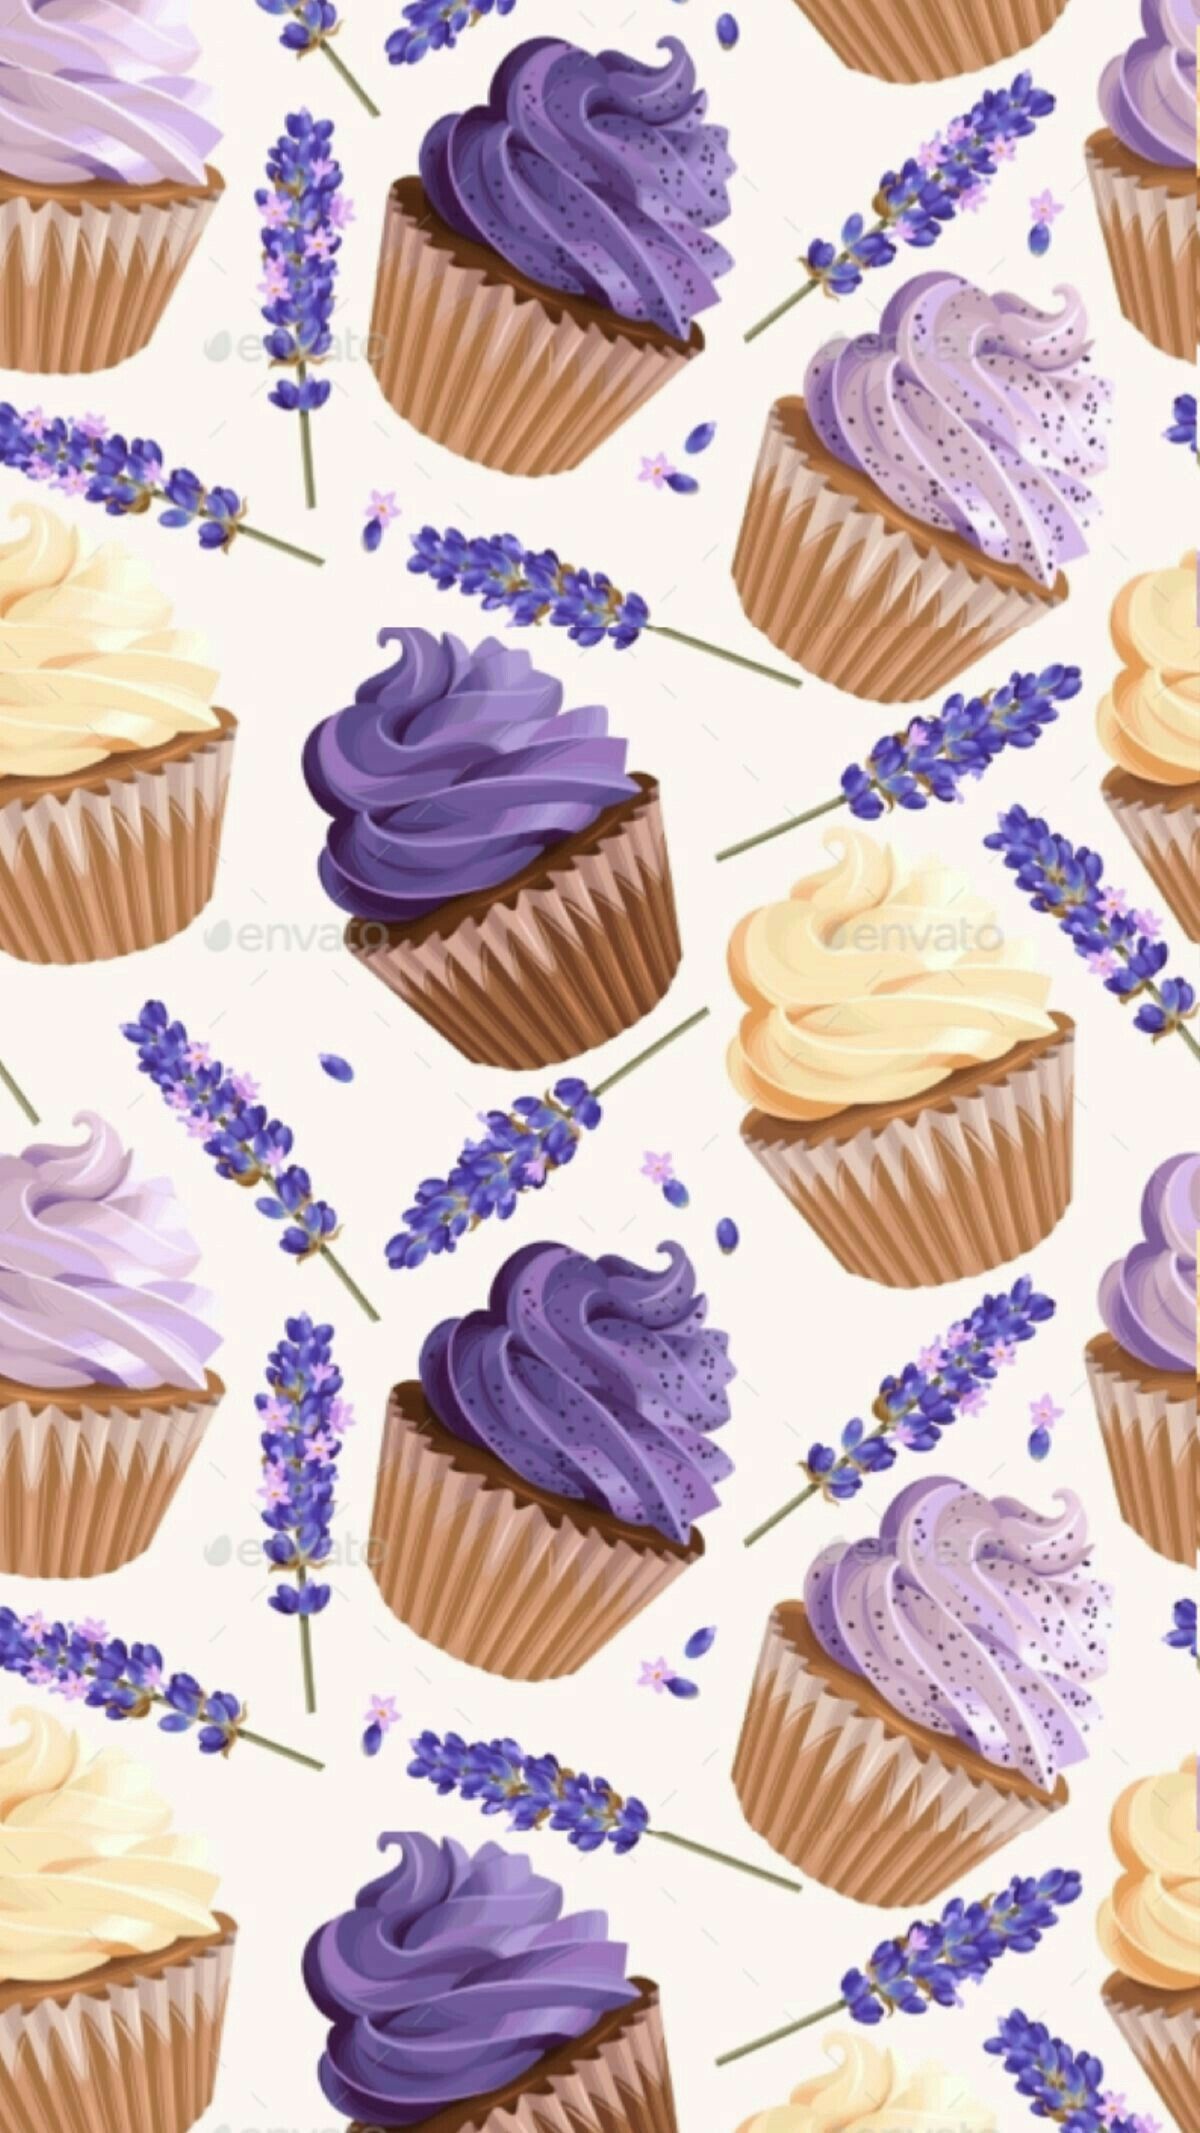 A pattern of cupcakes and lavender flowers - Bakery, cupcakes